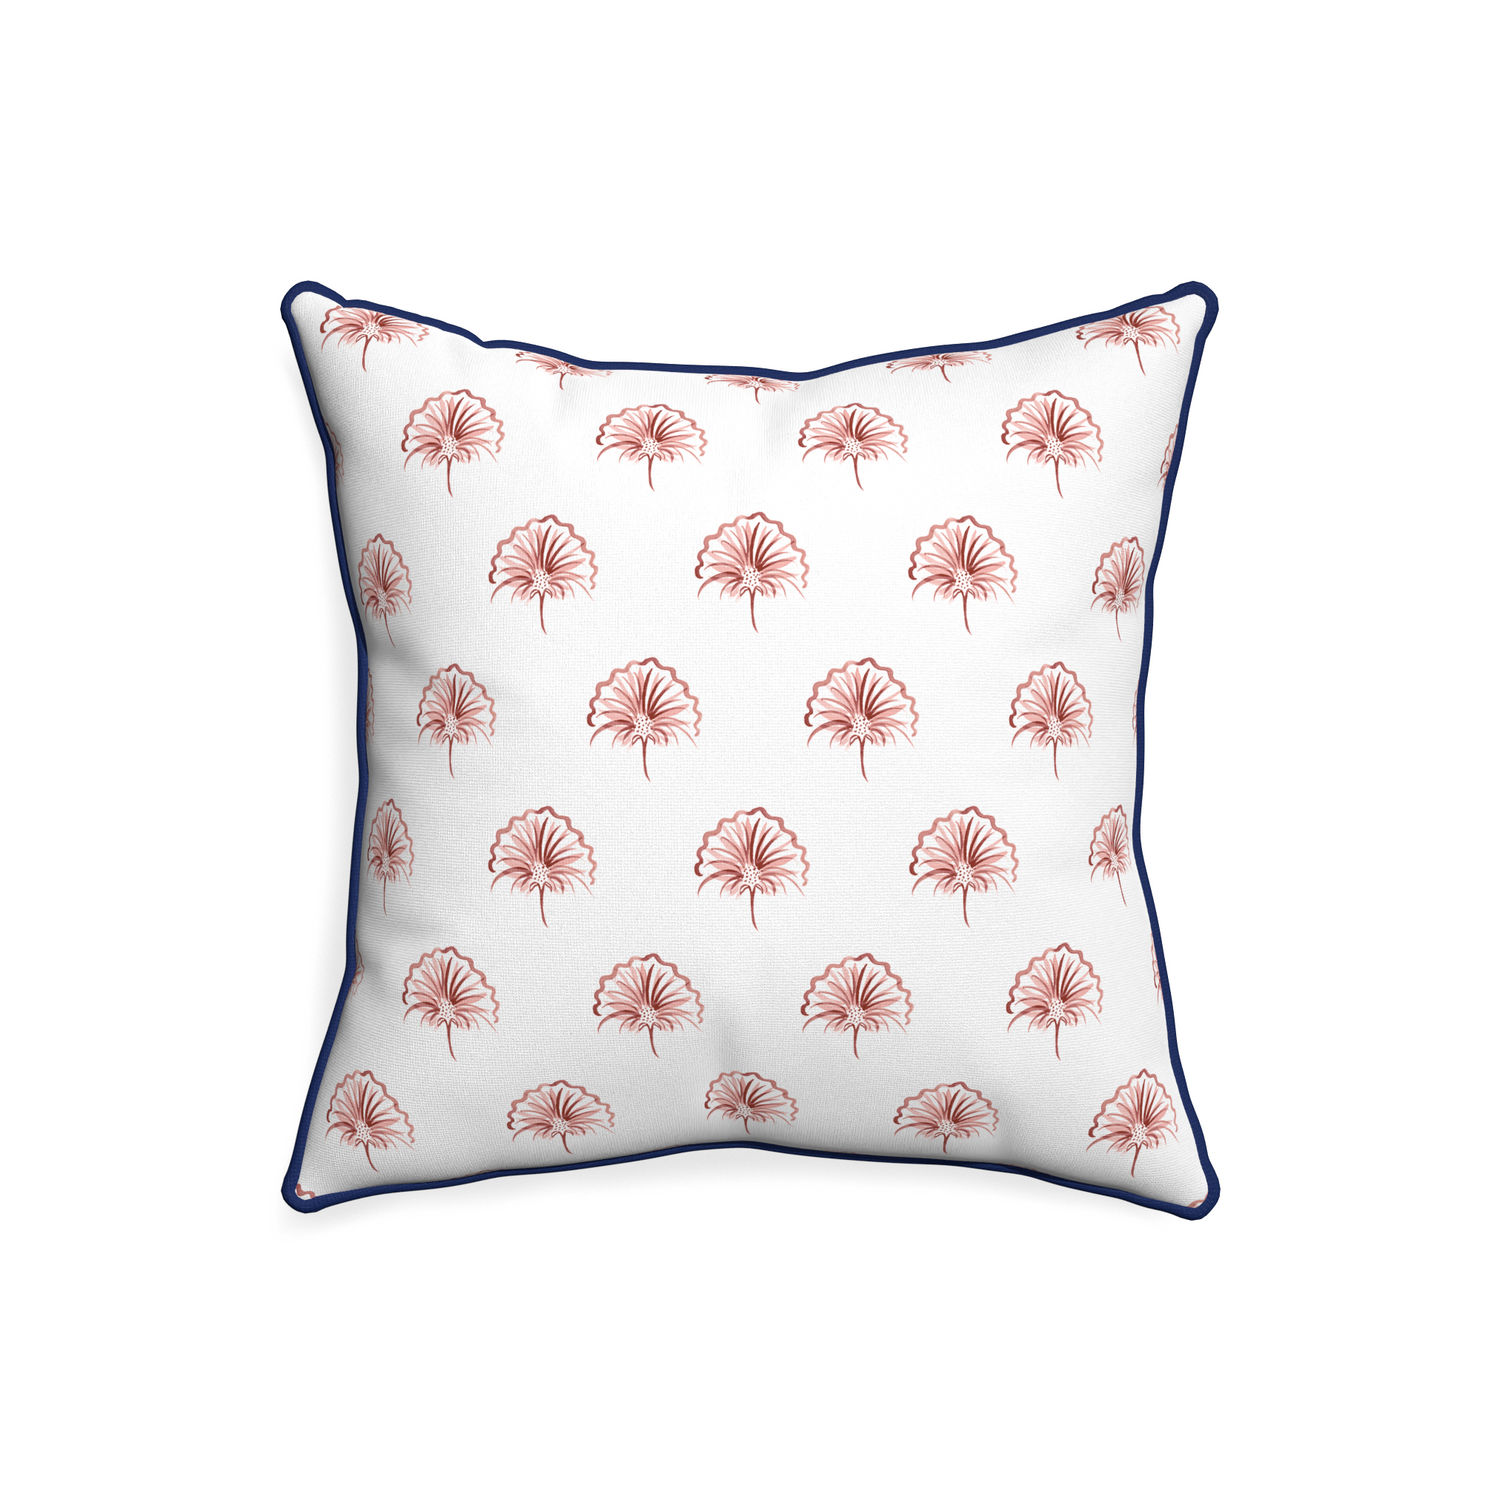 20-square penelope rose custom floral pinkpillow with midnight piping on white background